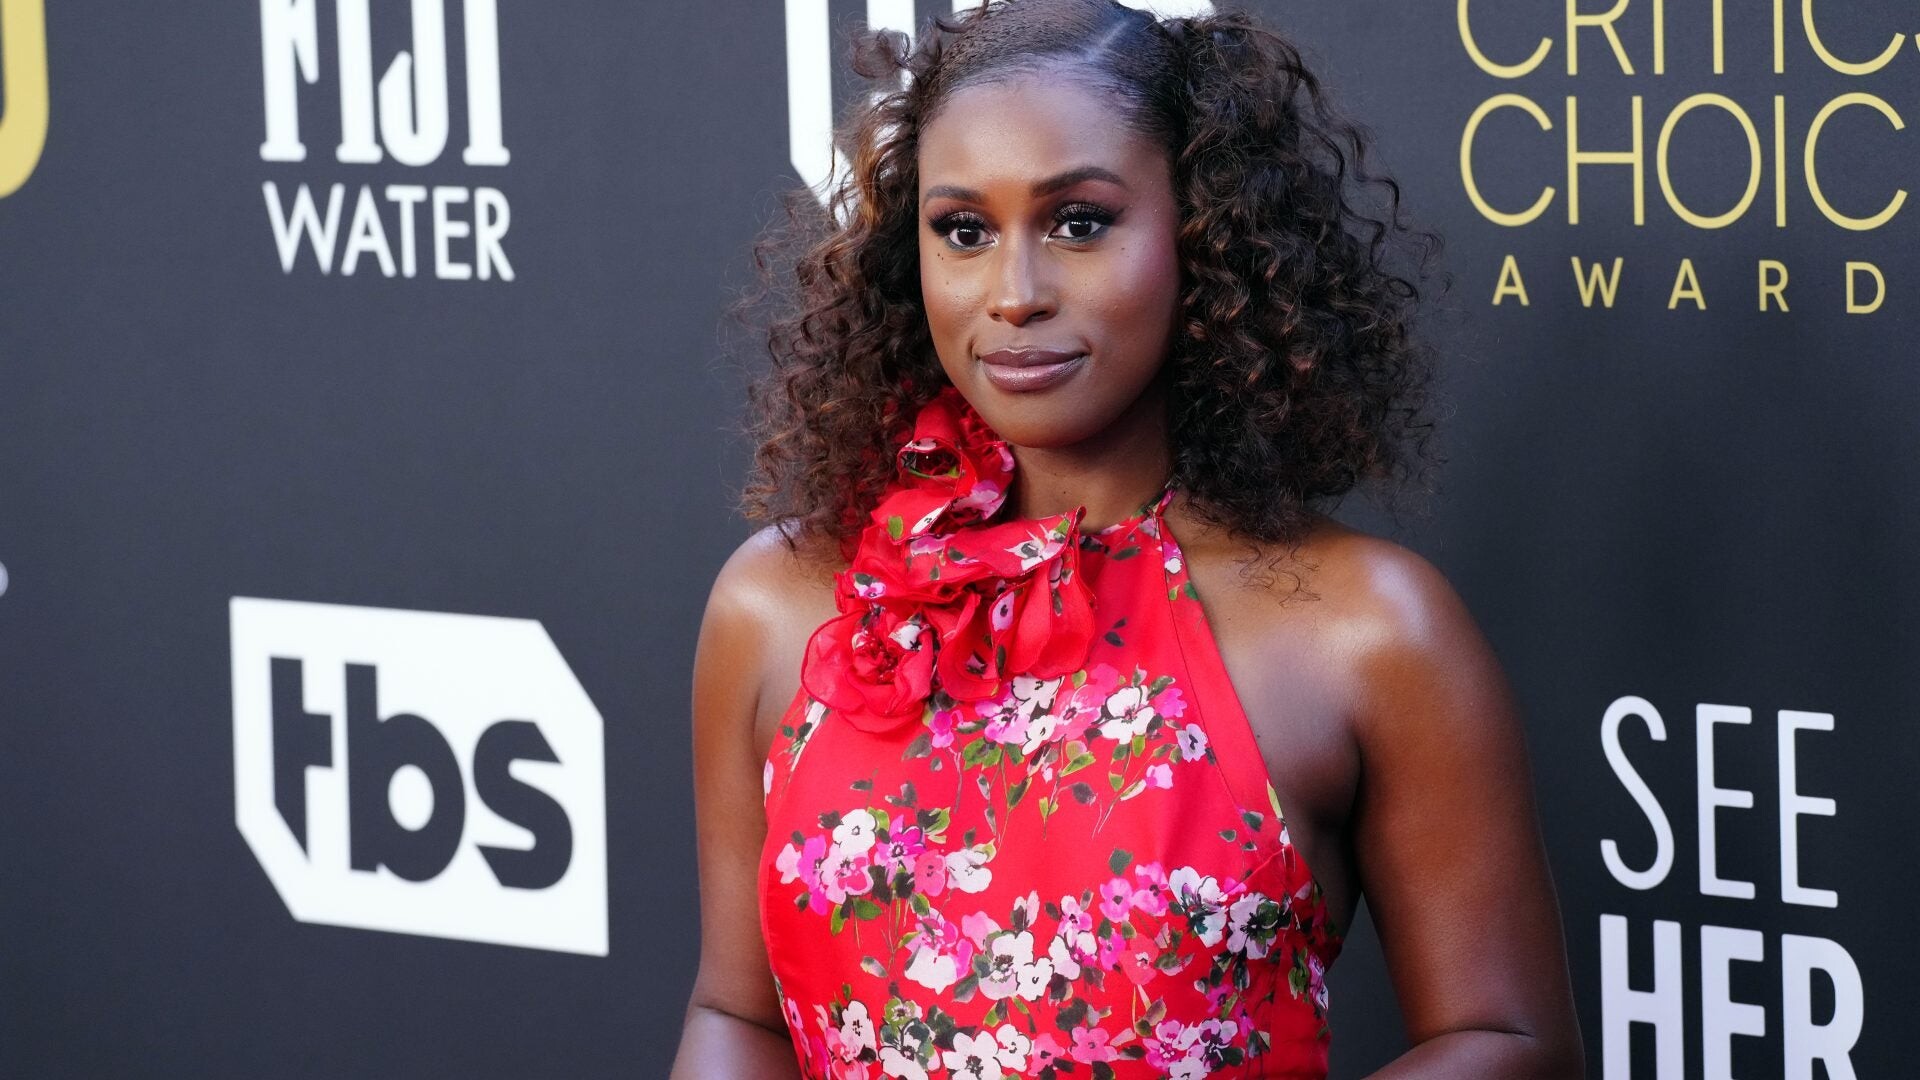 Issa Rae: The 2022 Critics' Choice Awards, Co-creator, co-writer, and star of the HBO television series Insecure. 1920x1080 Full HD Background.